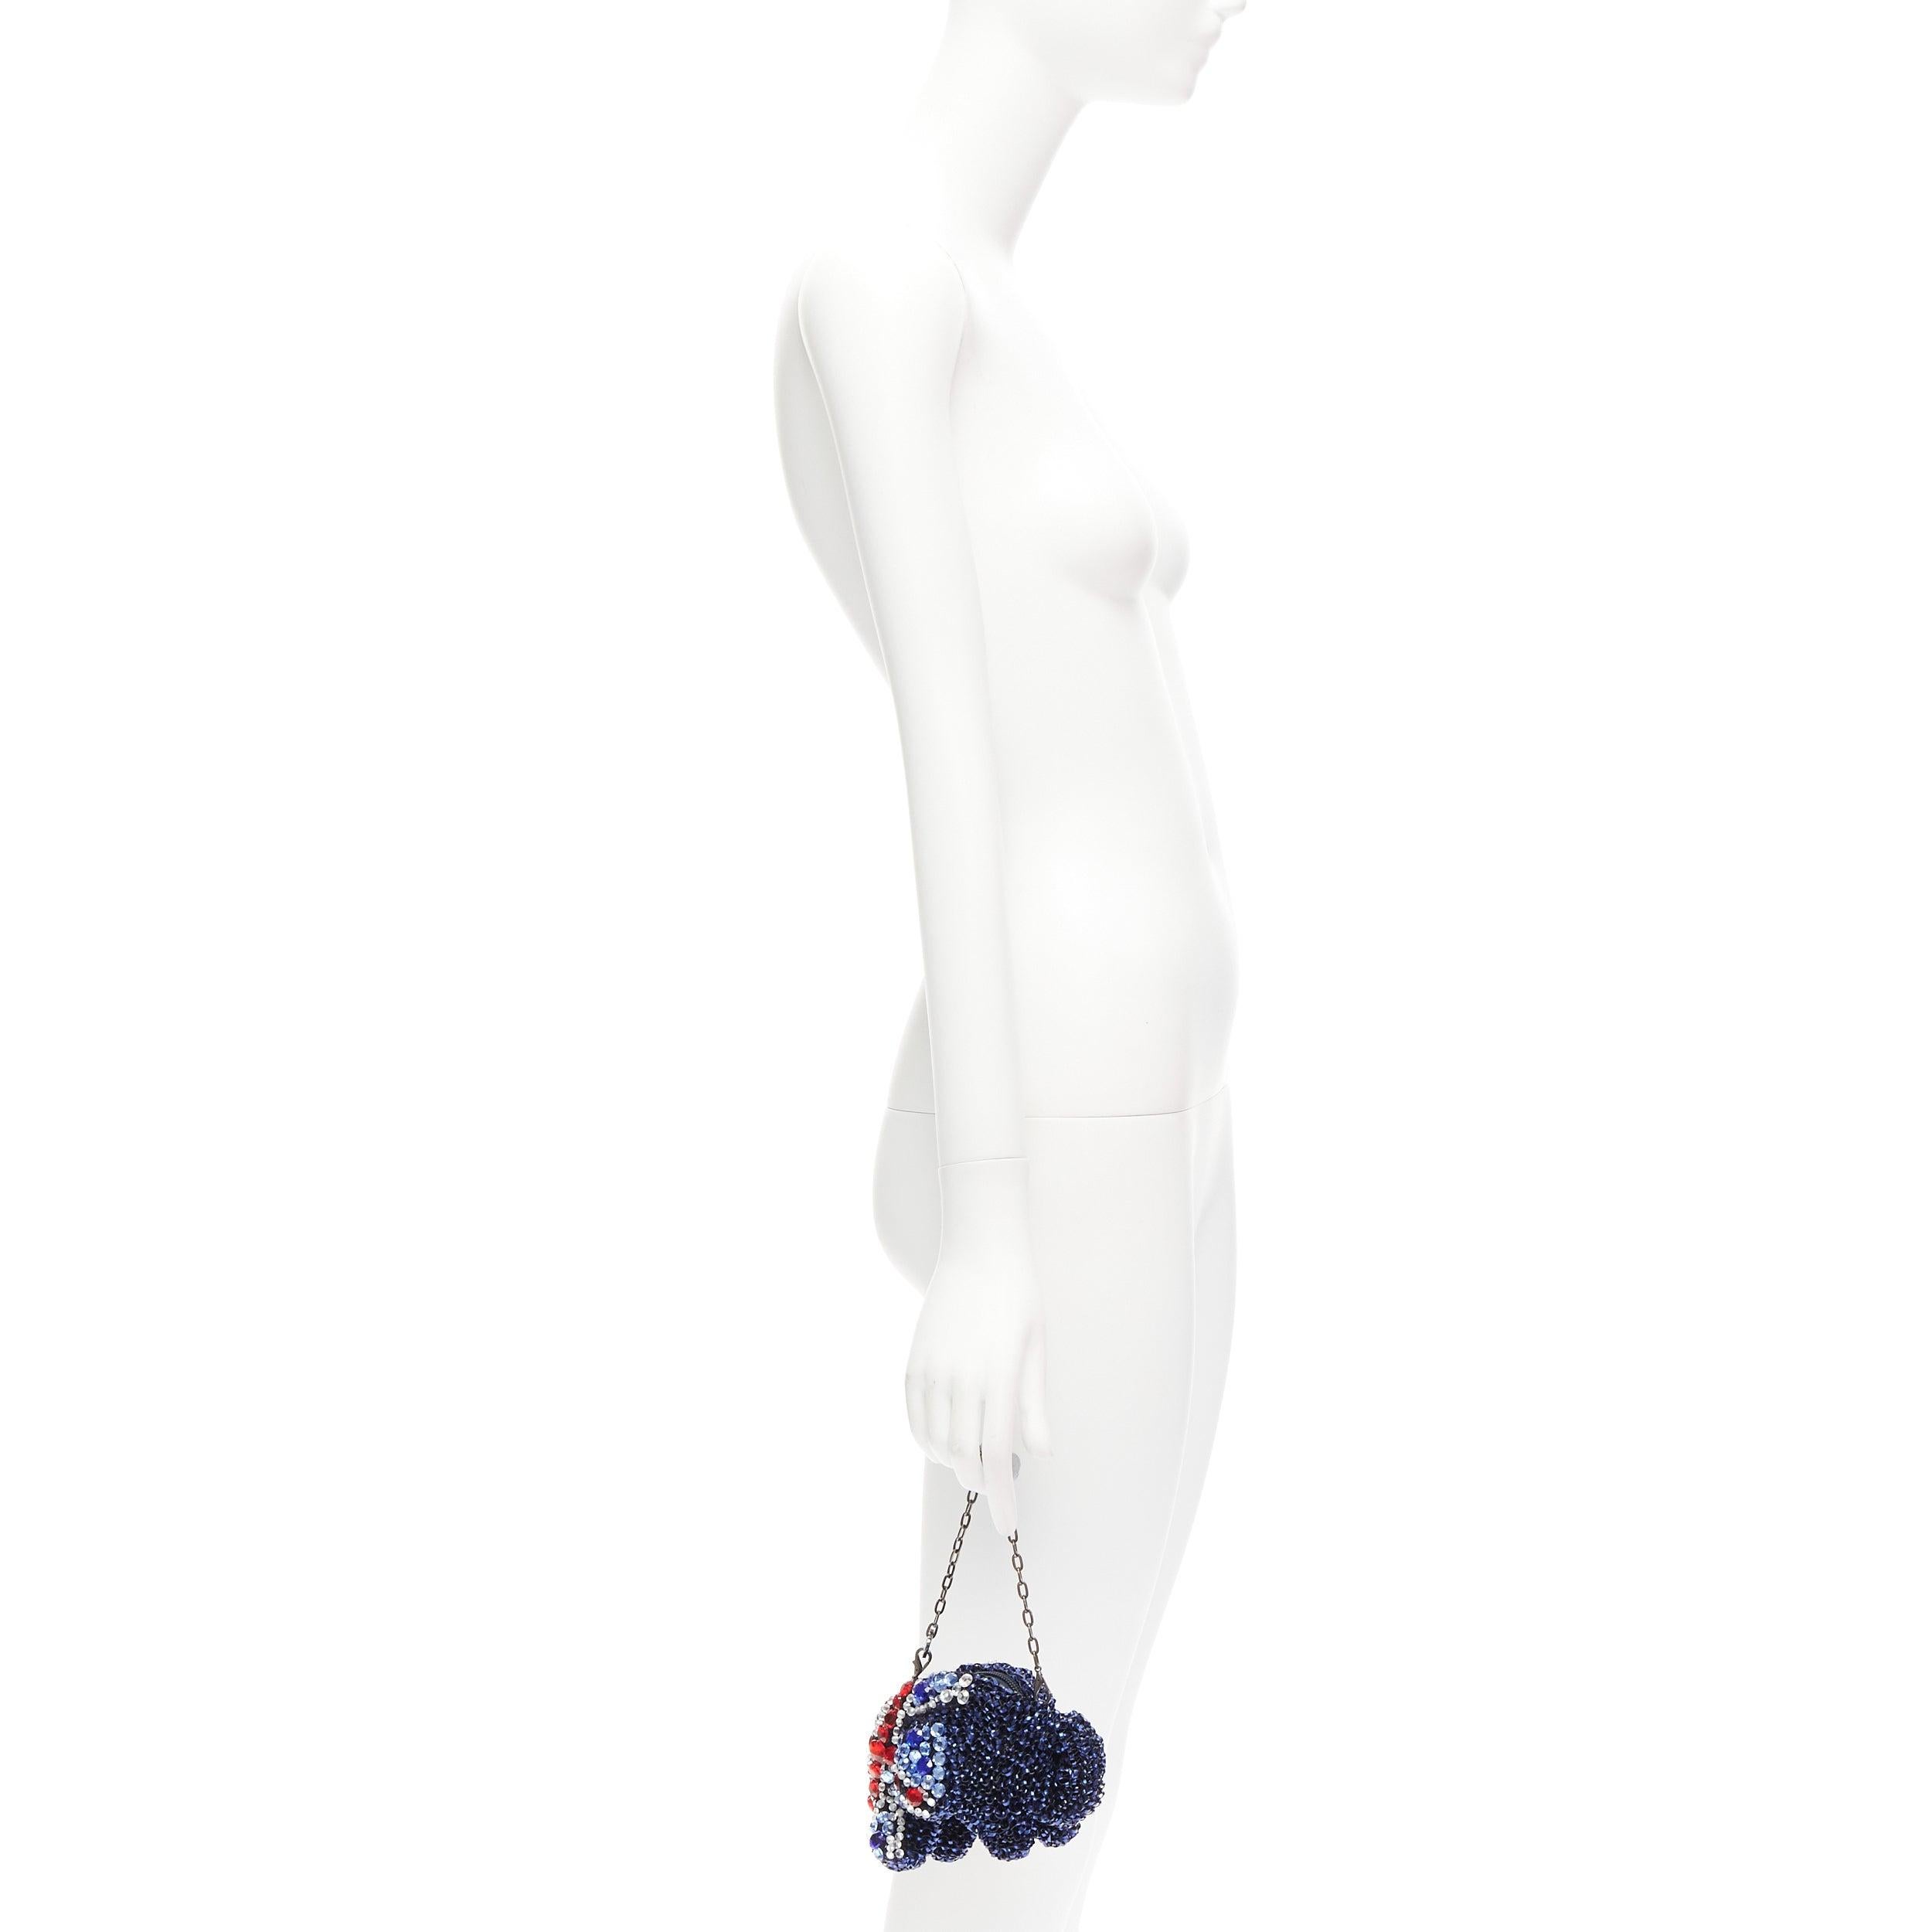 rare ANTEPRIMA Wire Bag blue red crystal Union Jack elephant clutch
Reference: ANWU/A01063
Brand: Anteprima
Collection: Wire Bag
Material: Plastic
Color: Red, Blue
Pattern: Solid
Closure: Zip
Extra Details: Silver chain